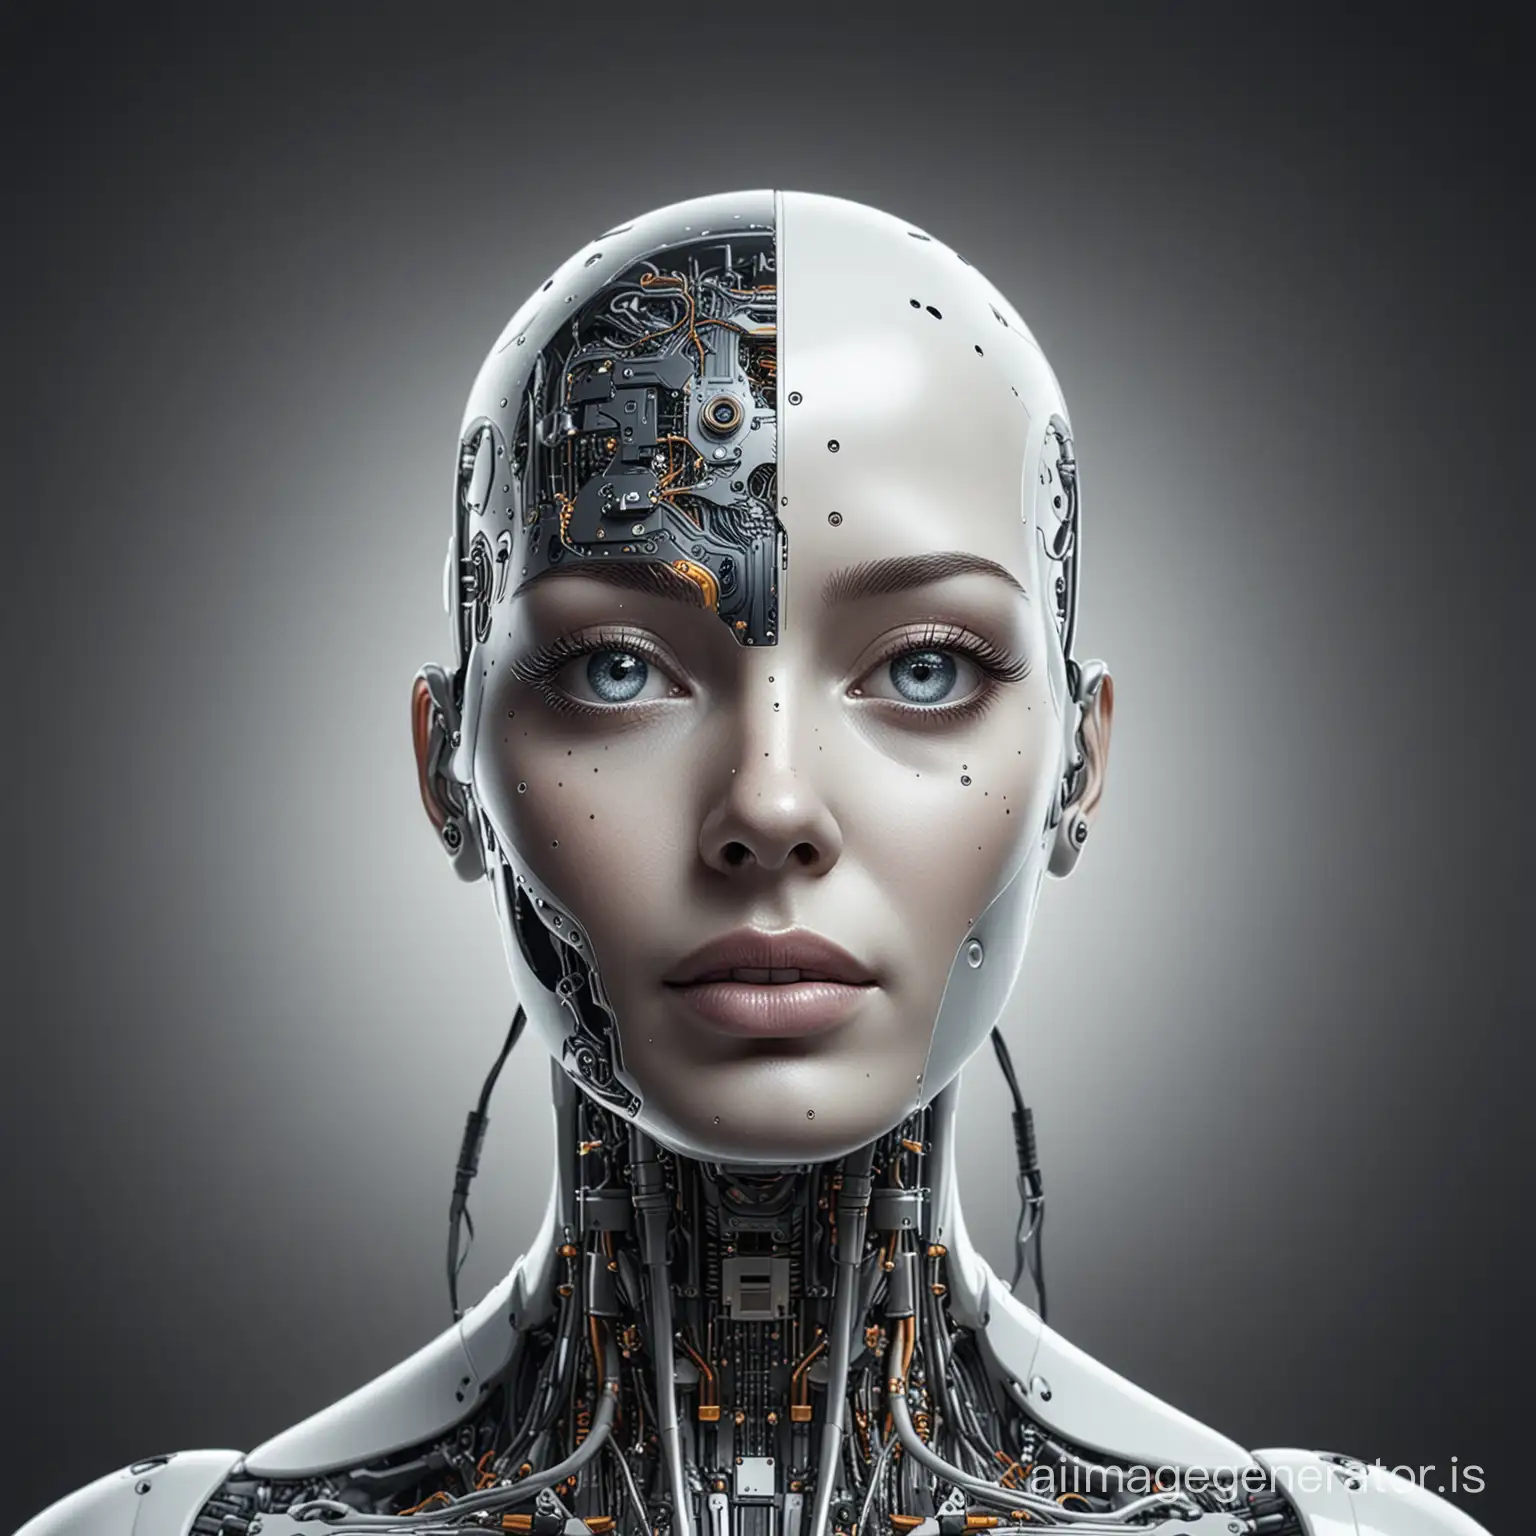 Artificial-Intelligence-Concept-Abstract-Representation-of-AI-Technology